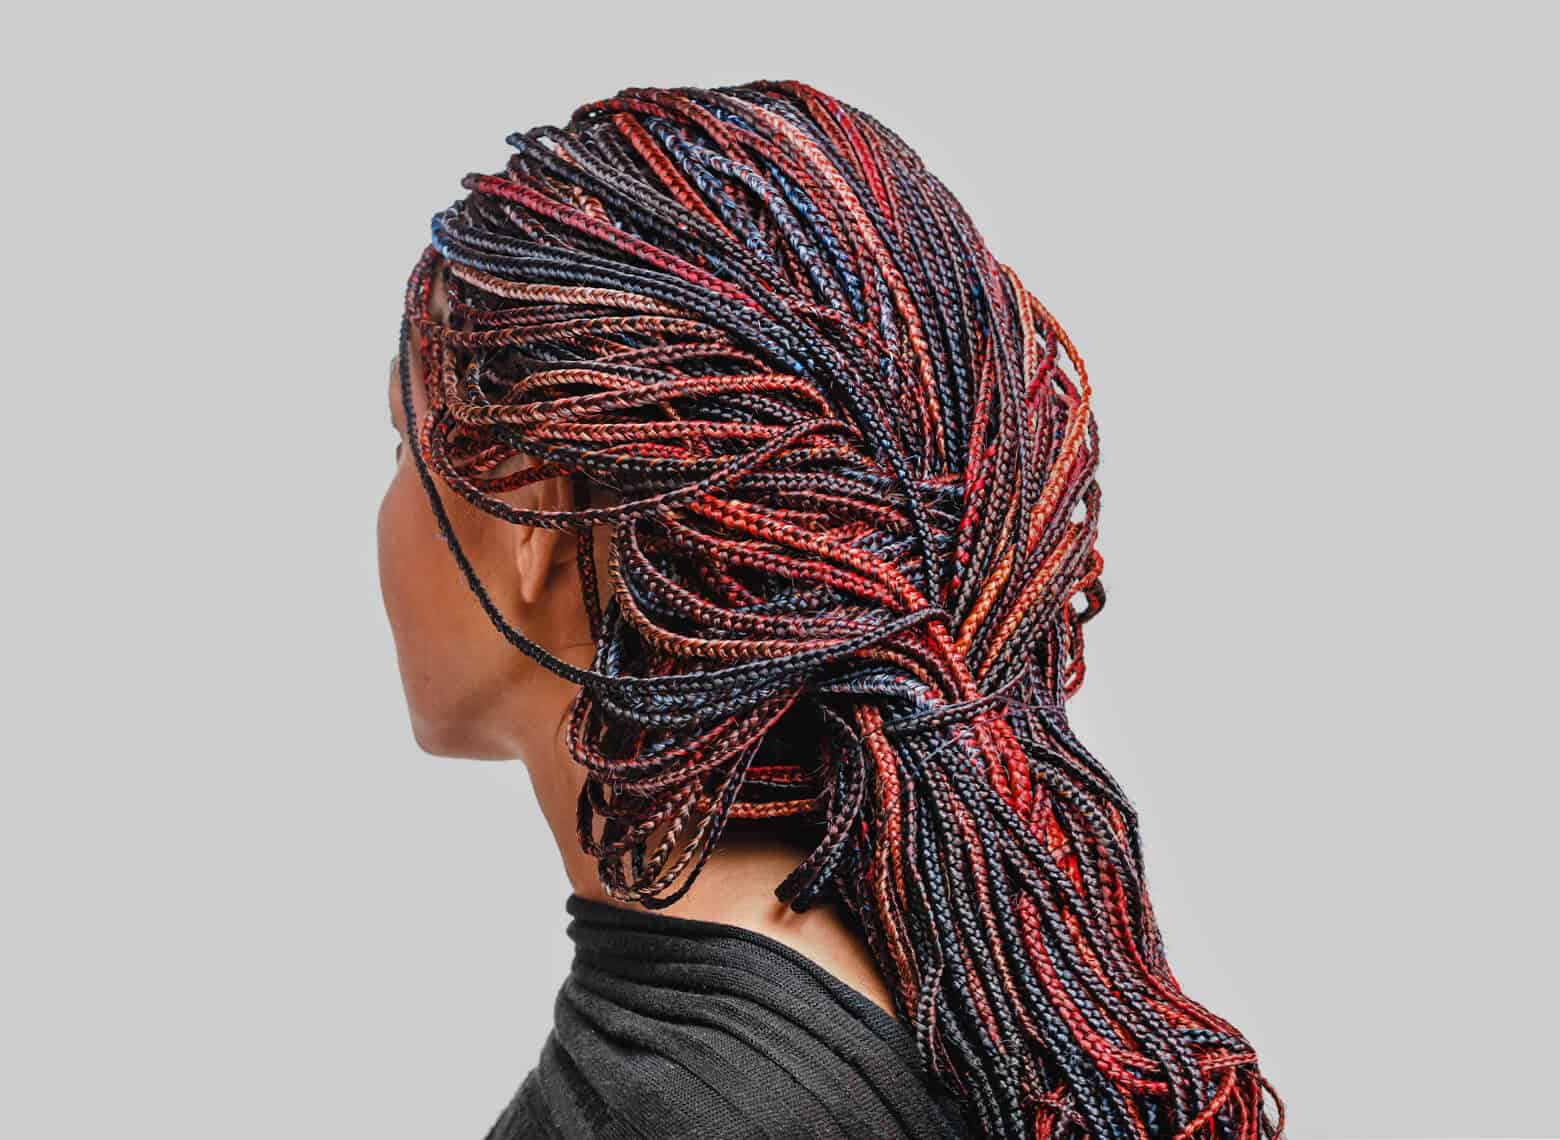 backside of person’s head with long and colorful red, blue, and black microbraids